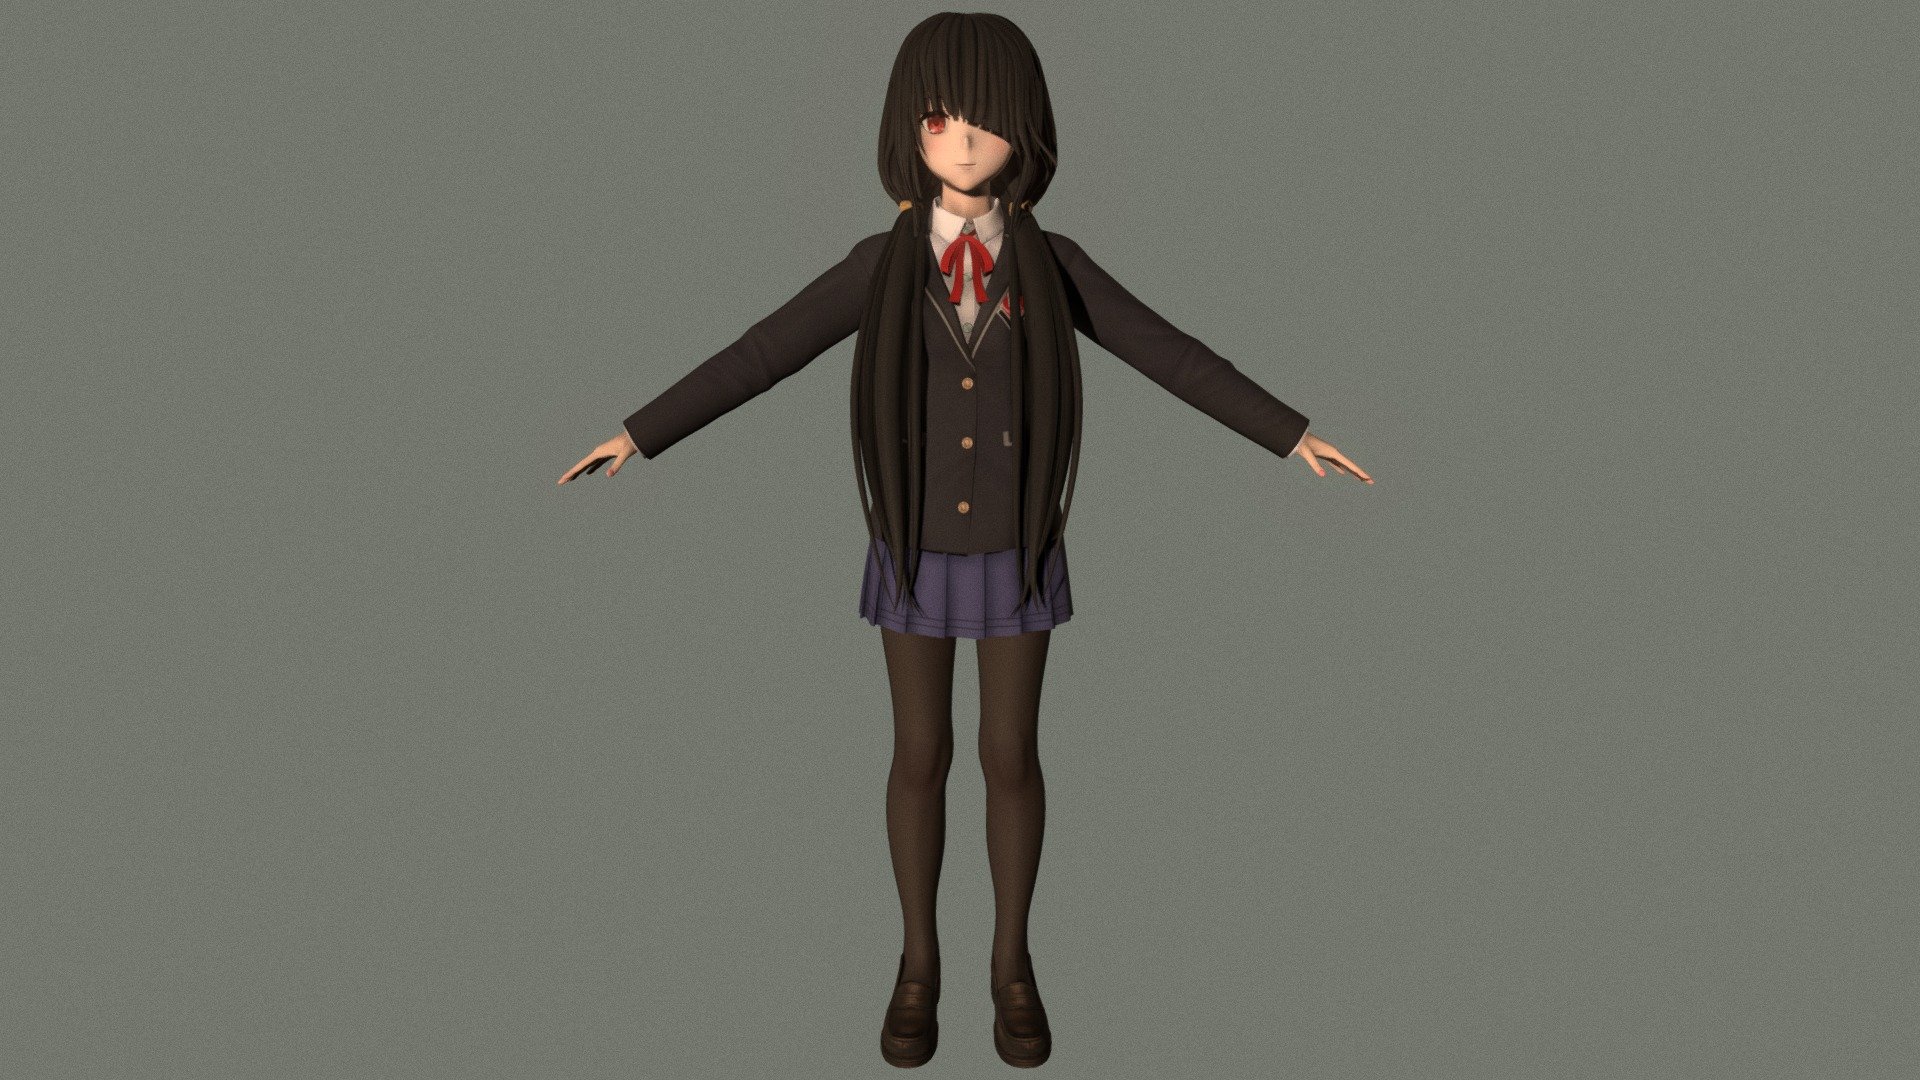 T-pose rigged model of anime girl Kurumi Tokisaki (Date A Live).

Body and clothings are rigged and skinned by 3ds Max CAT system.

Eye direction and facial animation controlled by Morpher modifier / Shape Keys / Blendshape.

This product include .FBX (ver. 7200) and .MAX (ver. 2010) files.

3ds Max version is turbosmoothed to give a high quality render (as you can see here).

Original main body mesh have ~7.000 polys.

This 3D model may need some tweaking to adapt the rig system to games engine and other platforms.

I support convert model to various file formats (the rig data will be lost in this process): 3DS; AI; ASE; DAE; DWF; DWG; DXF; FLT; HTR; IGS; M3G; MQO; OBJ; SAT; STL; W3D; WRL; X.

You can buy all of my models in one pack to save cost: https://sketchfab.com/3d-models/all-of-my-anime-girls-c5a56156994e4193b9e8fa21a3b8360b

And I can make commission models.

If you have any questions, please leave a comment or contact me via my email 3d.eden.project@gmail.com 3d model